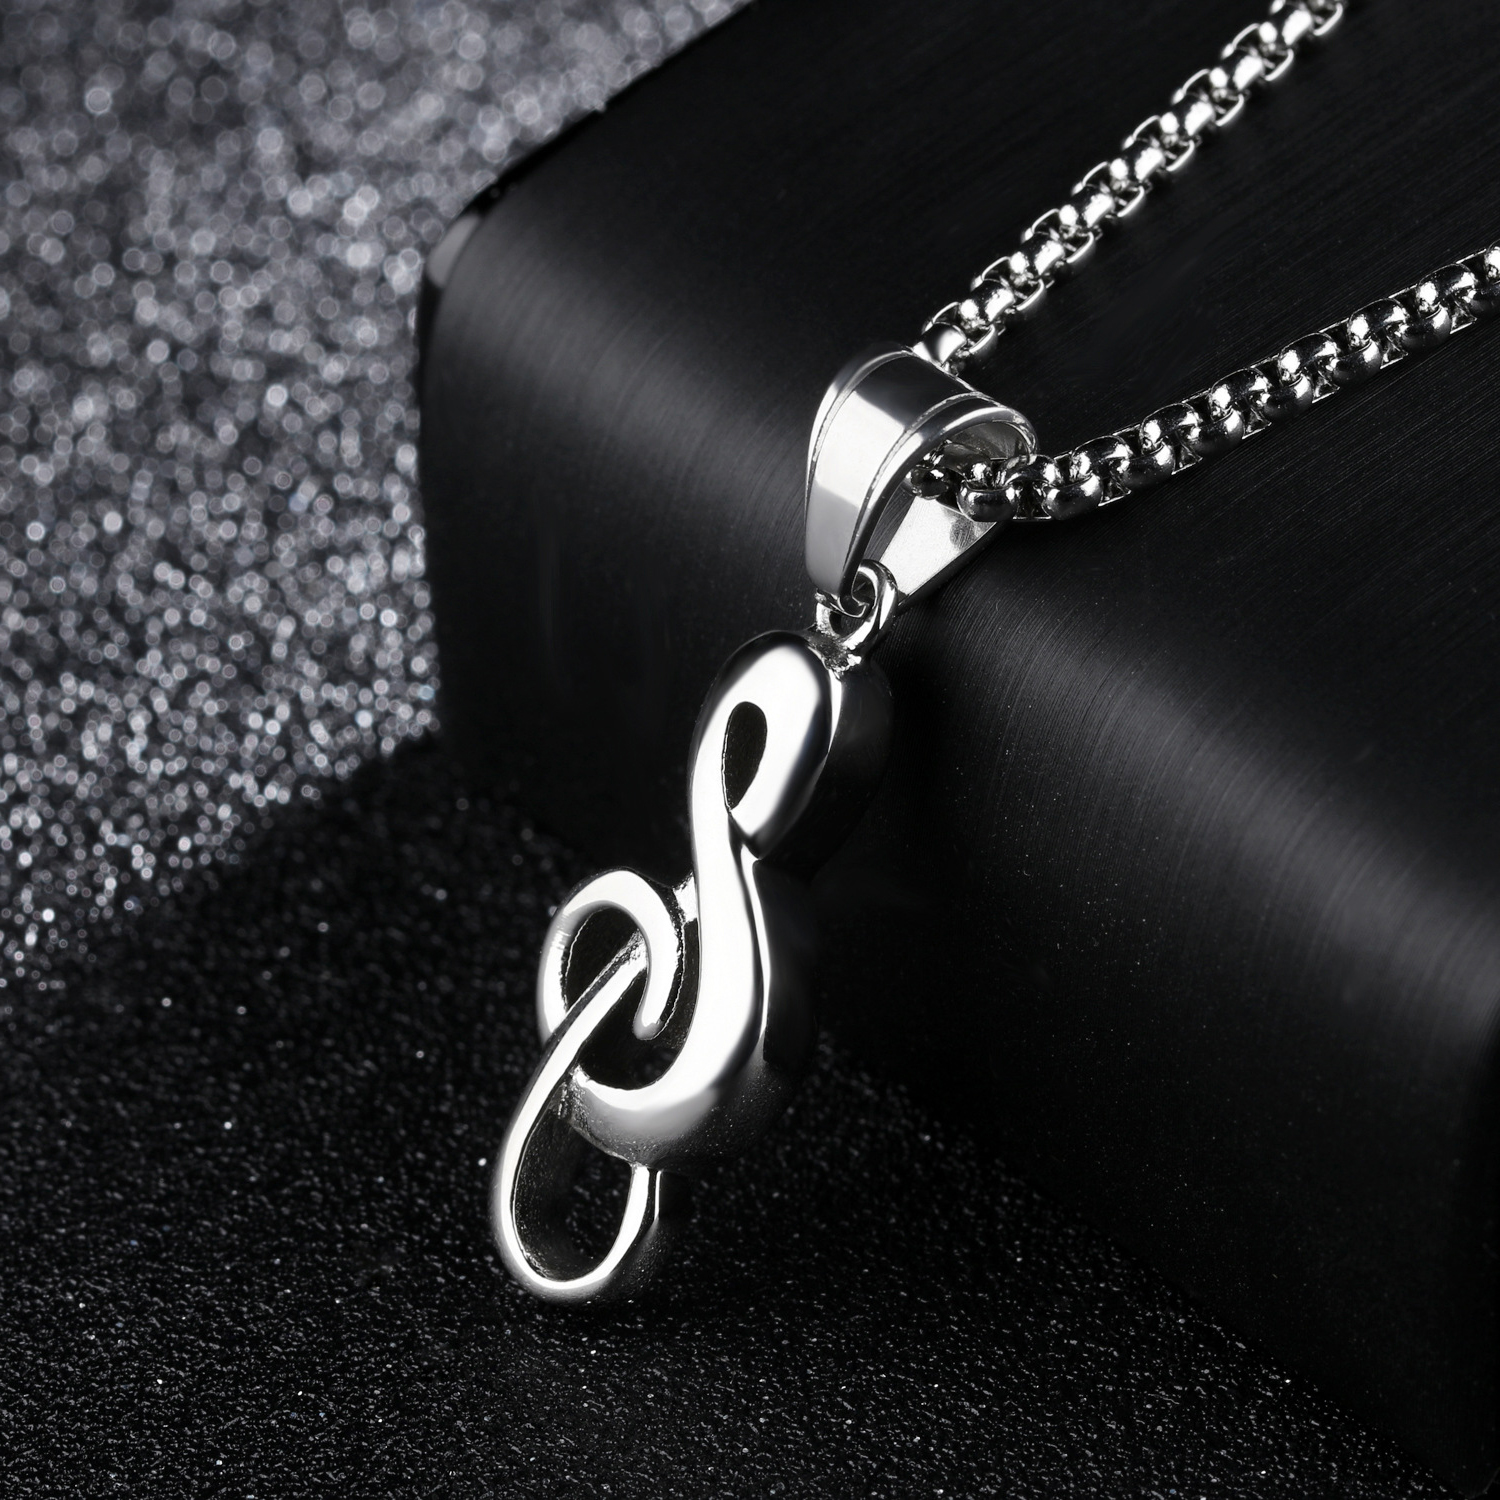 1:Steel-(3 * 550mm pearl chain with pendant formula)